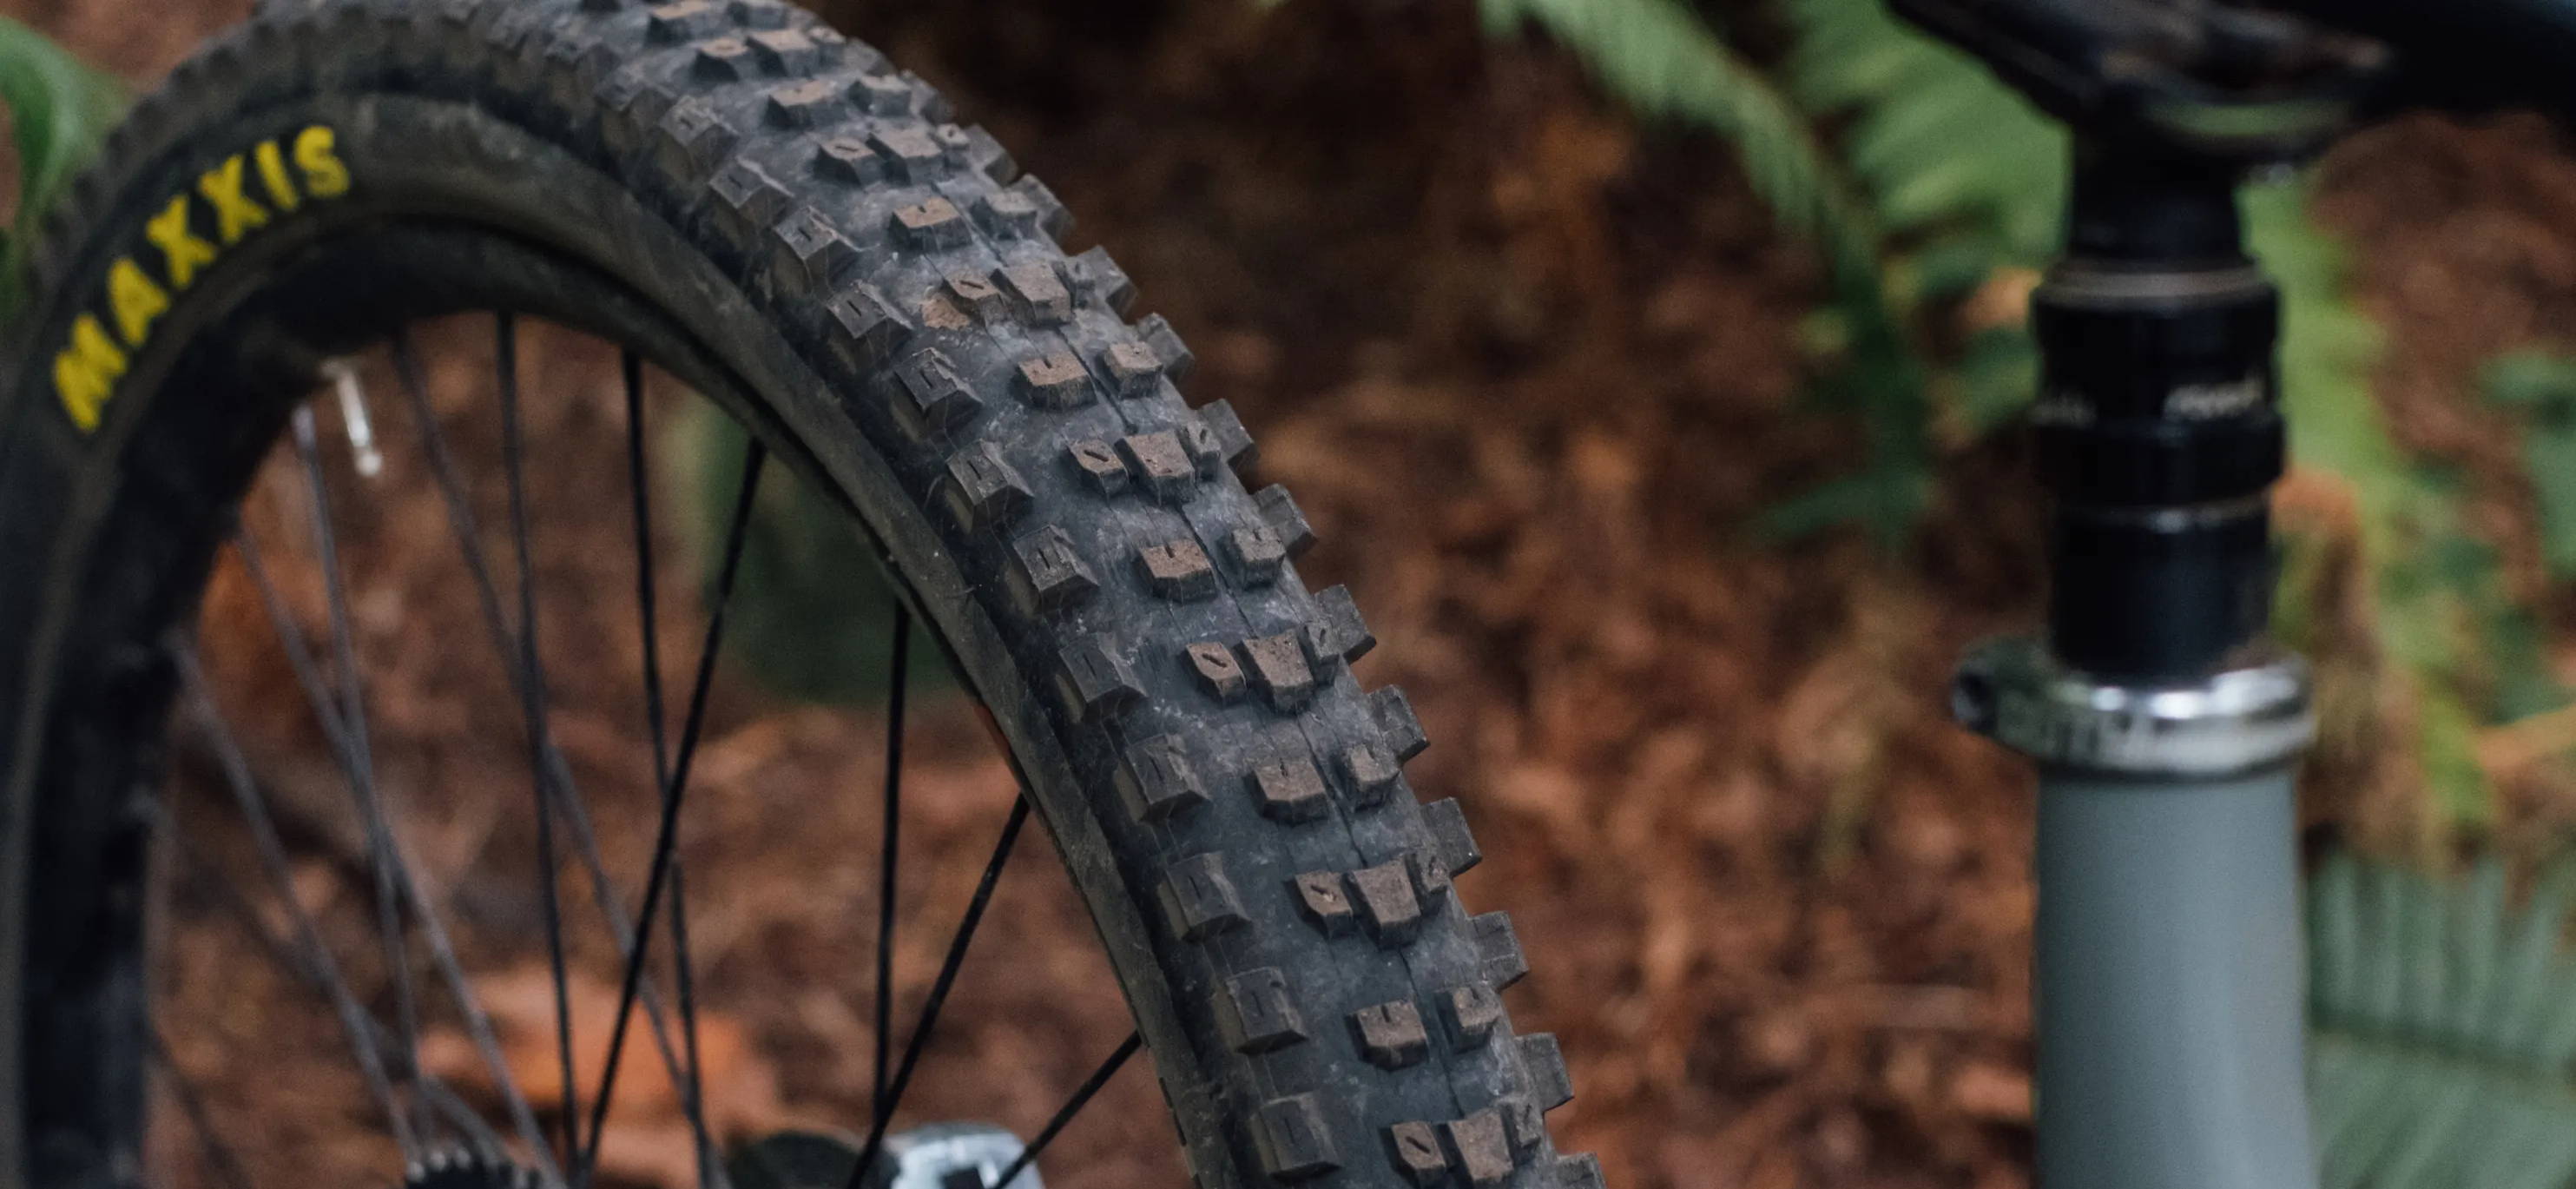 Maxxis dissector mountain bike rear tire installed on a Transition Patrol in nature